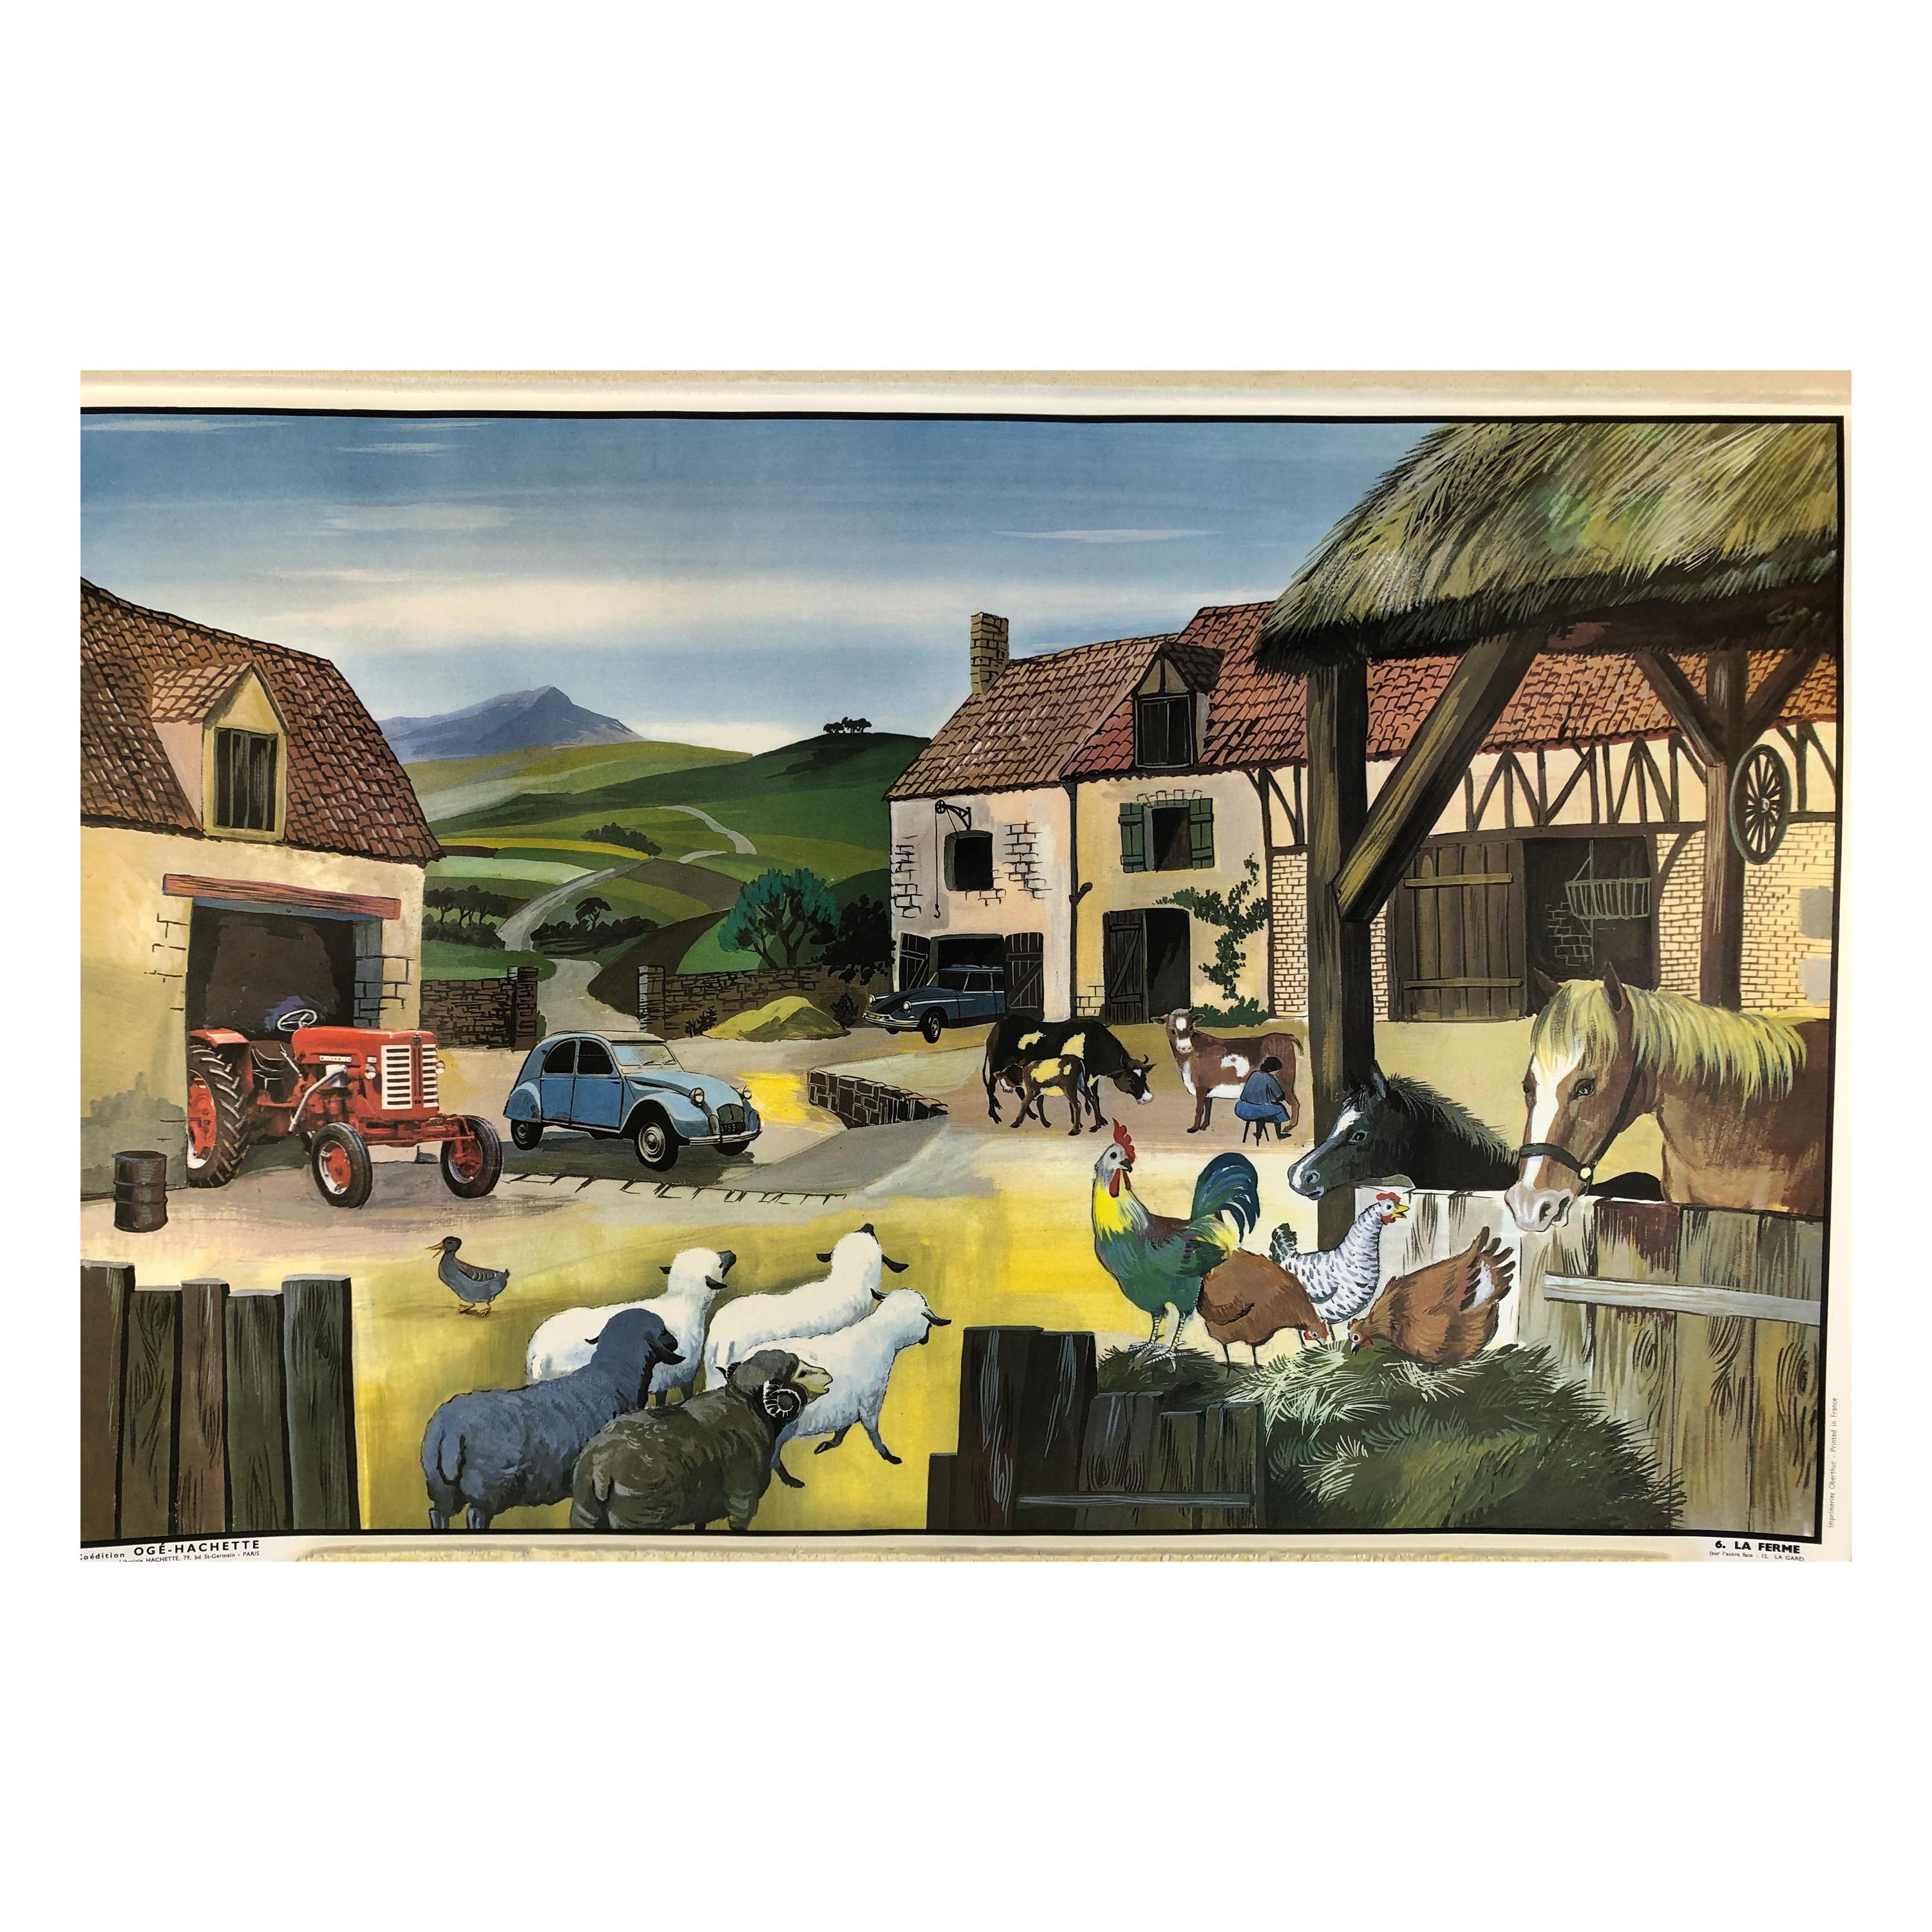 1960s Double-Sided School Poster by Oge-Hachette, The Farm and The Train Station For Sale